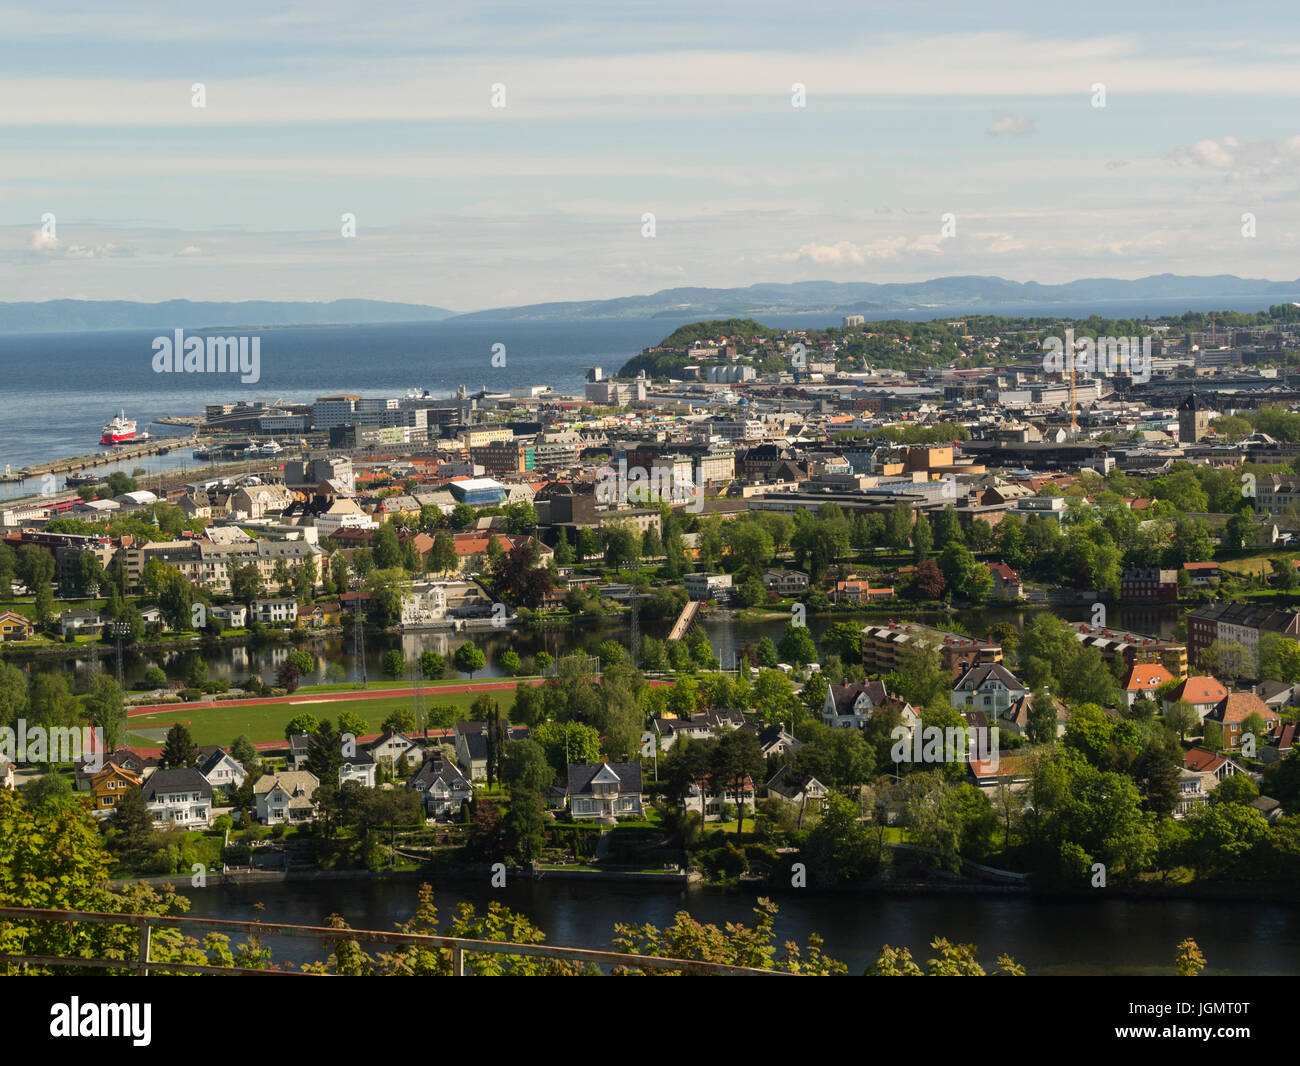 View of Trondheim from a viewpoint high above the city located on Trondheim Fjord Norway Stock Photo